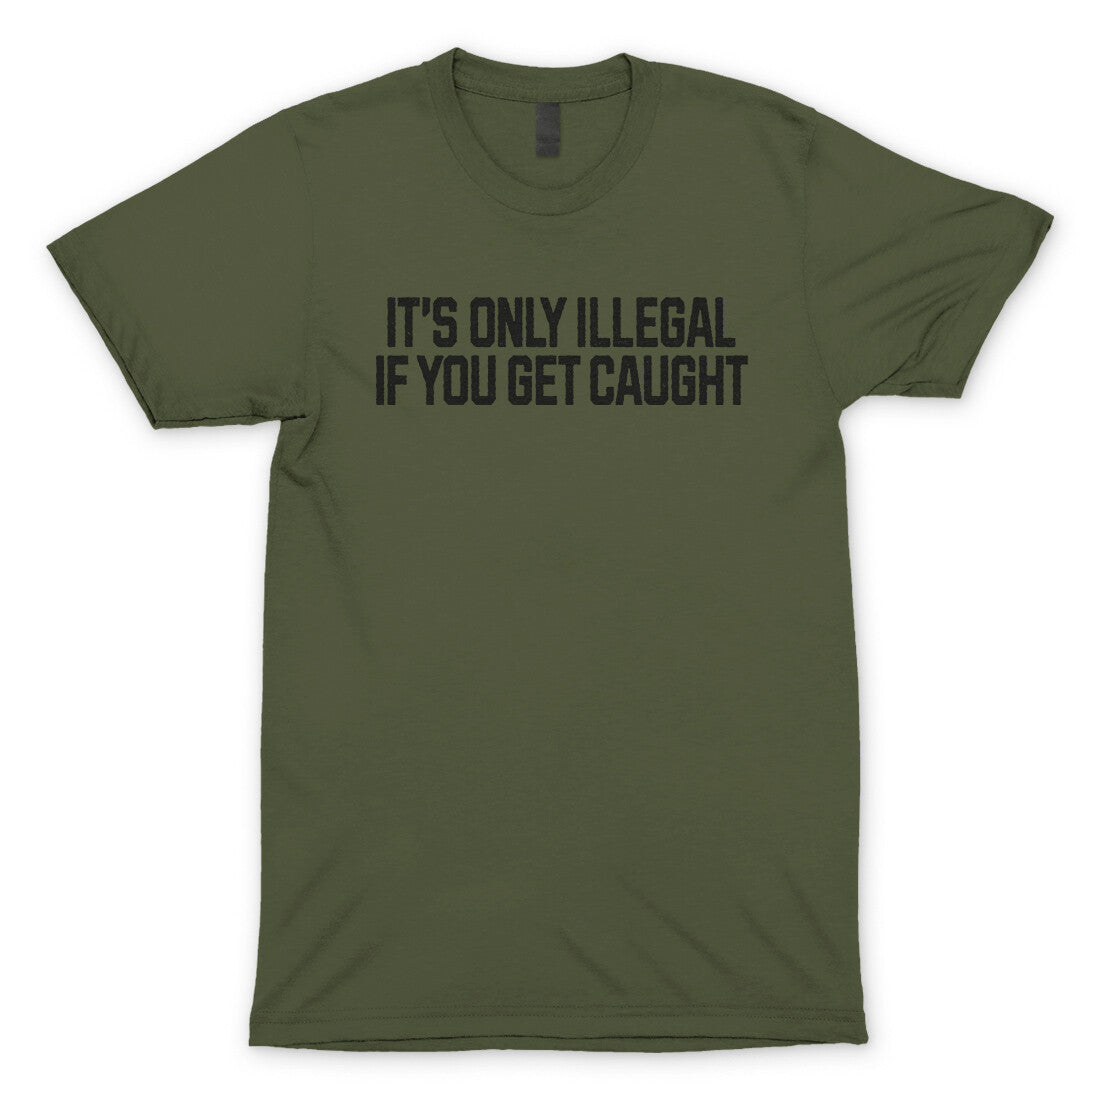 It’s Only Illegal If You Get Caught in Military Green Color